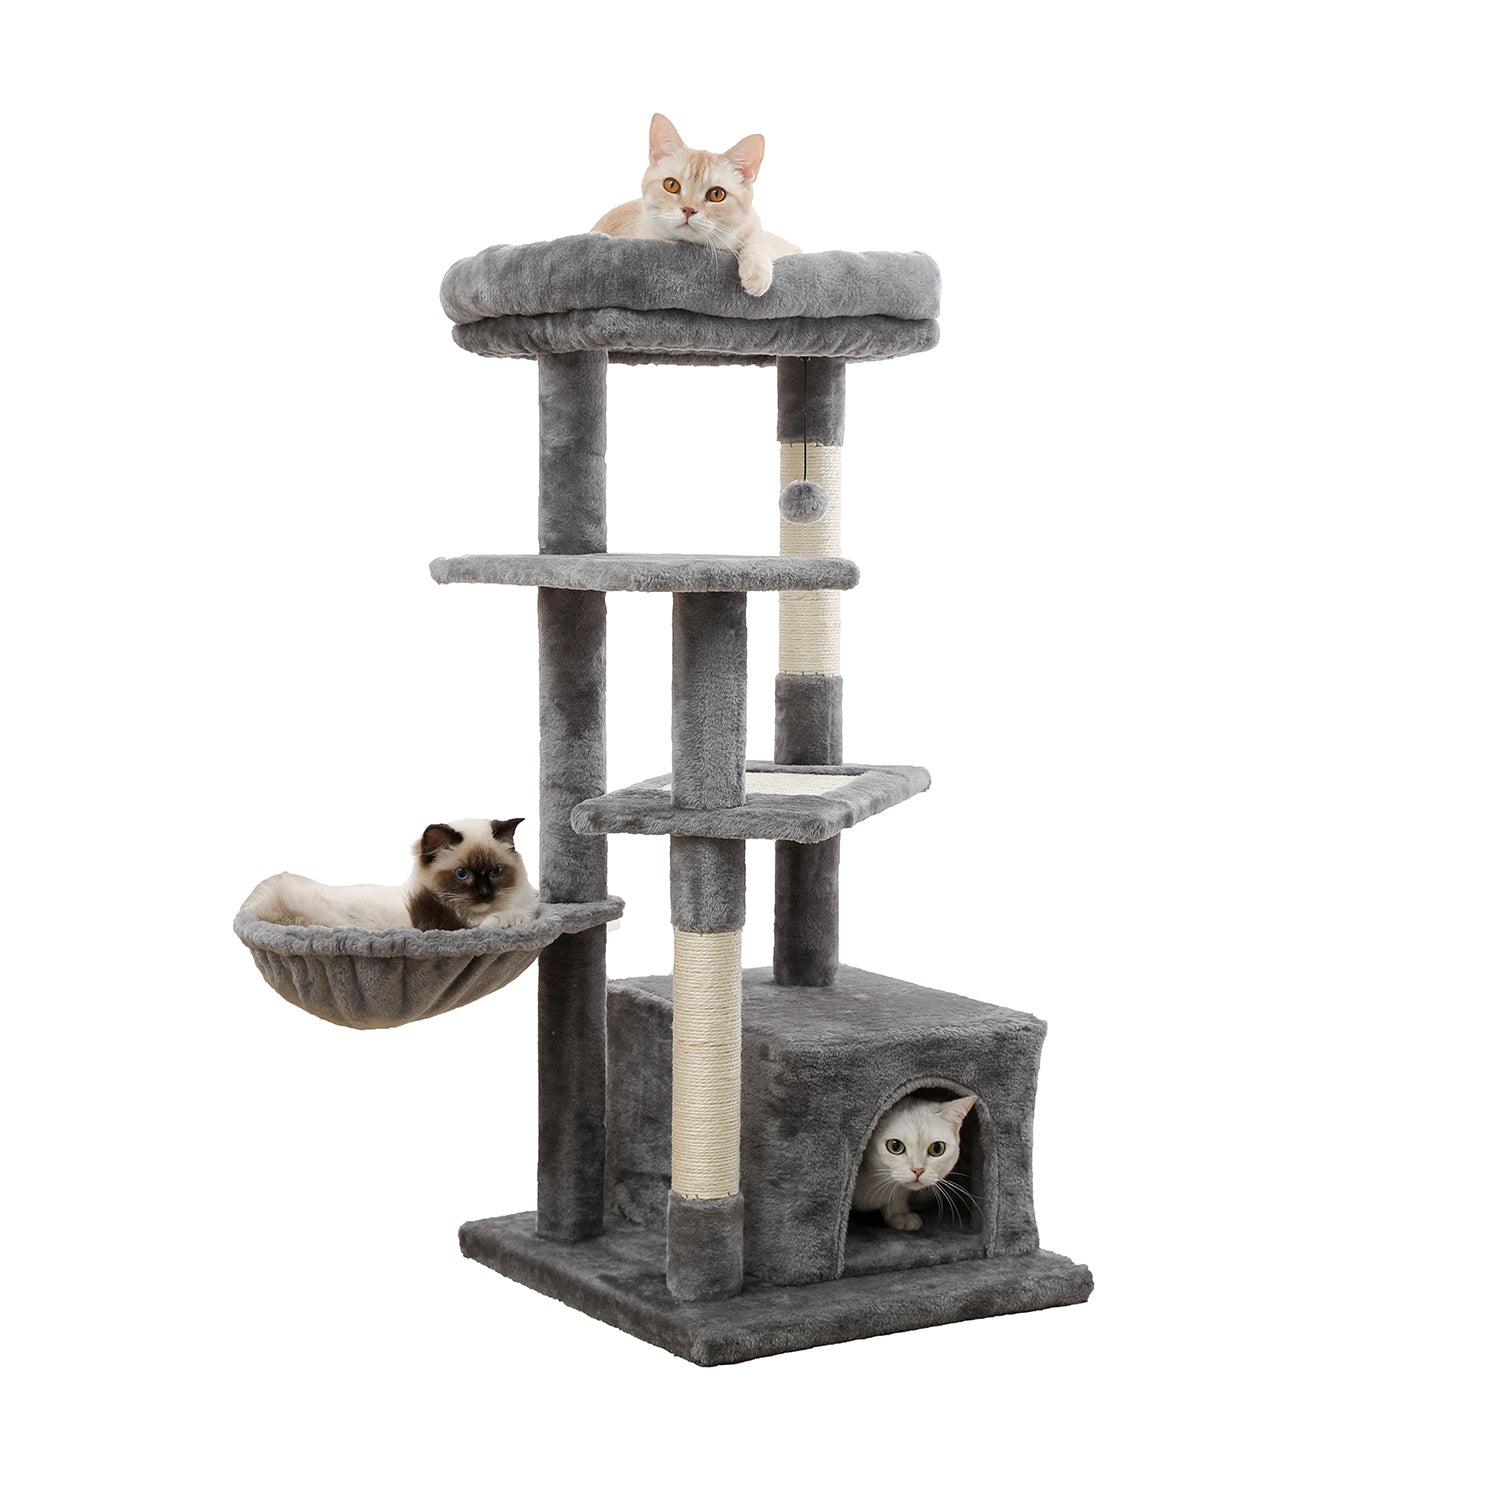 Multi-Level Modern Cat Tree with Scratching Post, Cozy Condo, Top Perch, Hammock and Dangling Ball For Small to Medium Cats - TOYSHIP